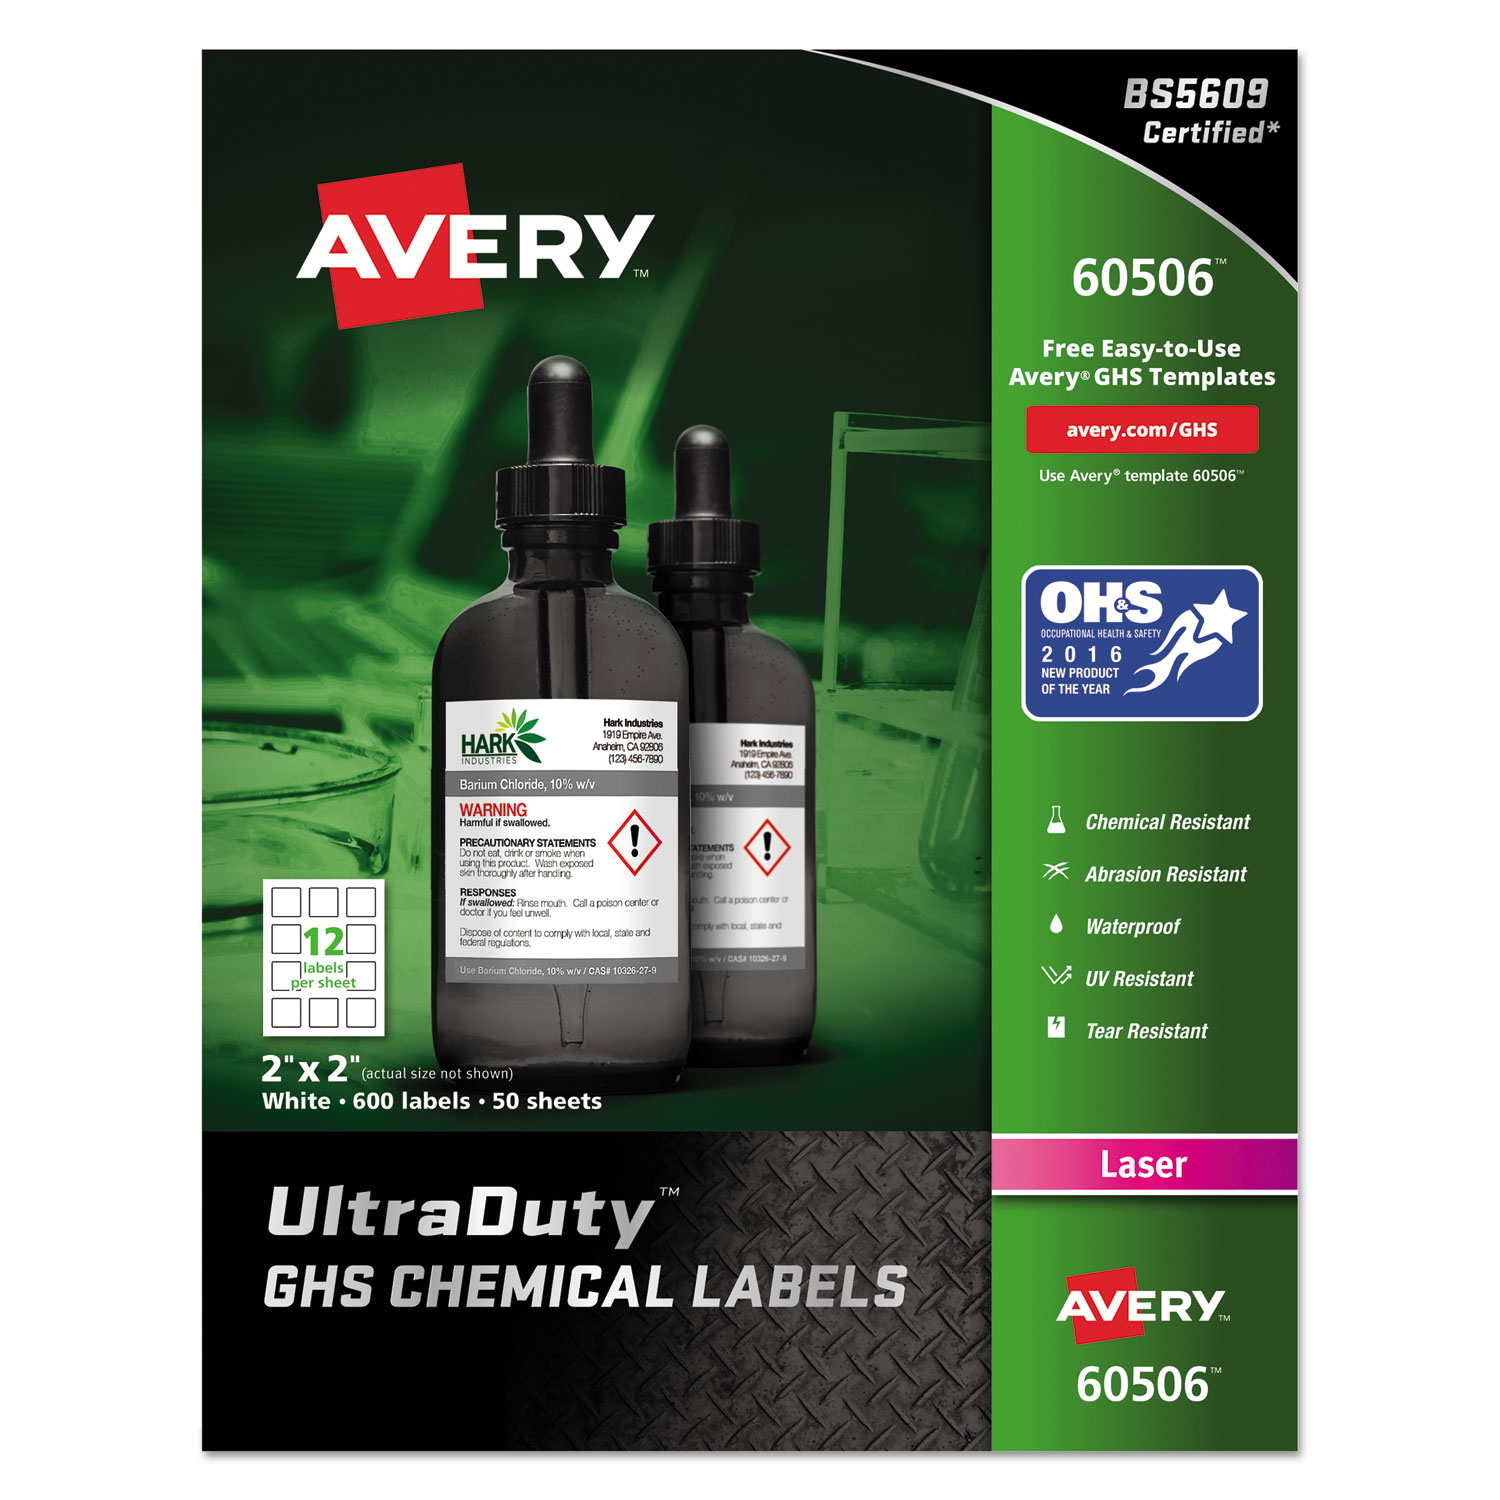  Avery 60506 UltraDuty GHS Chemical Waterproof and UV Resistant Labels, 2 x 2, White, 12/Sheet, 50 Sheets/Box (AVE60506) 